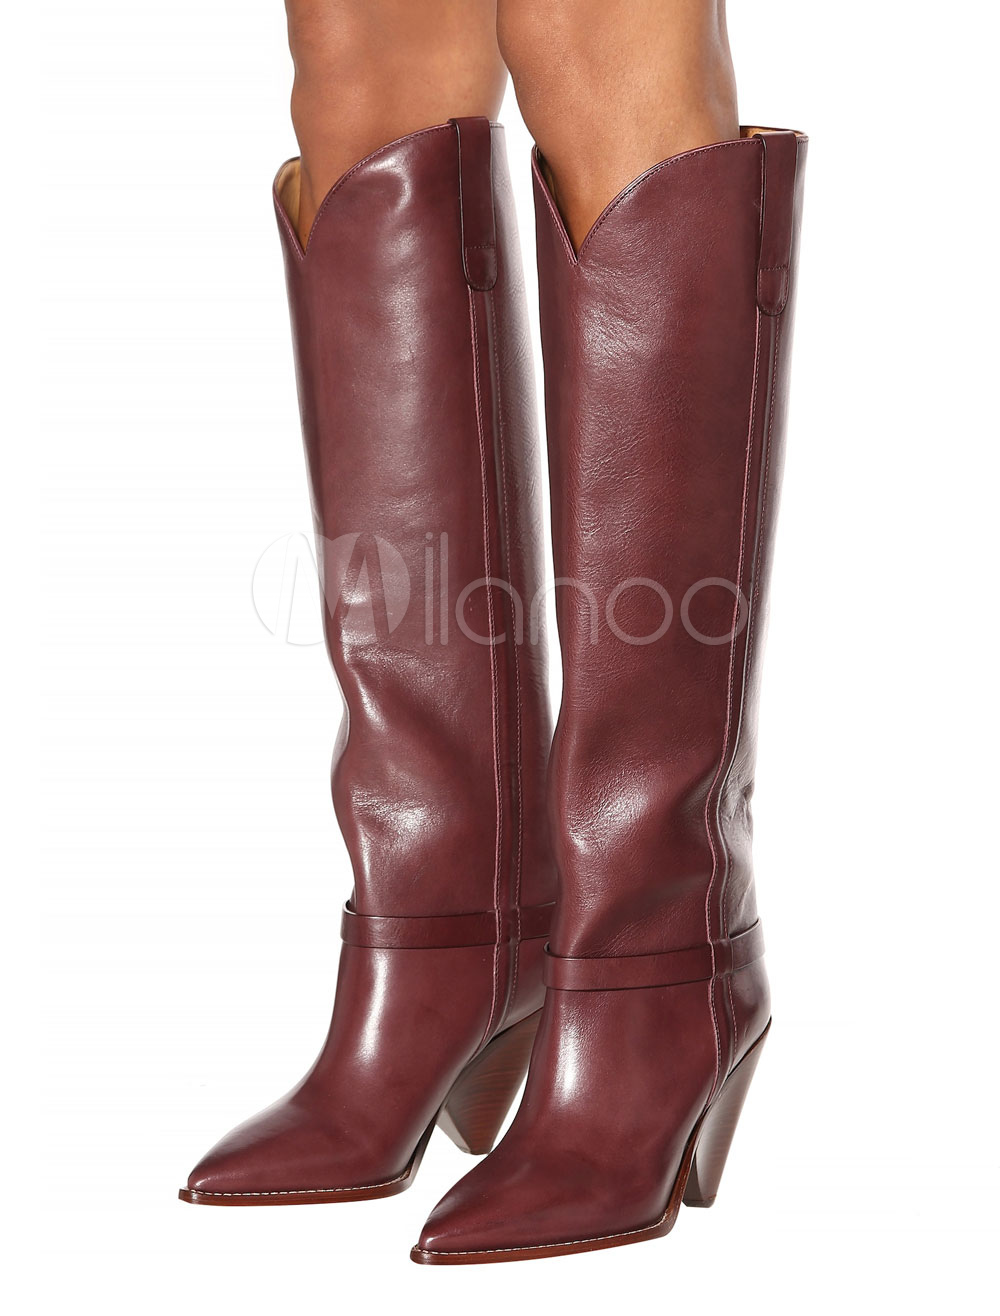 Burgundy Knee High Boots Women Pointed 